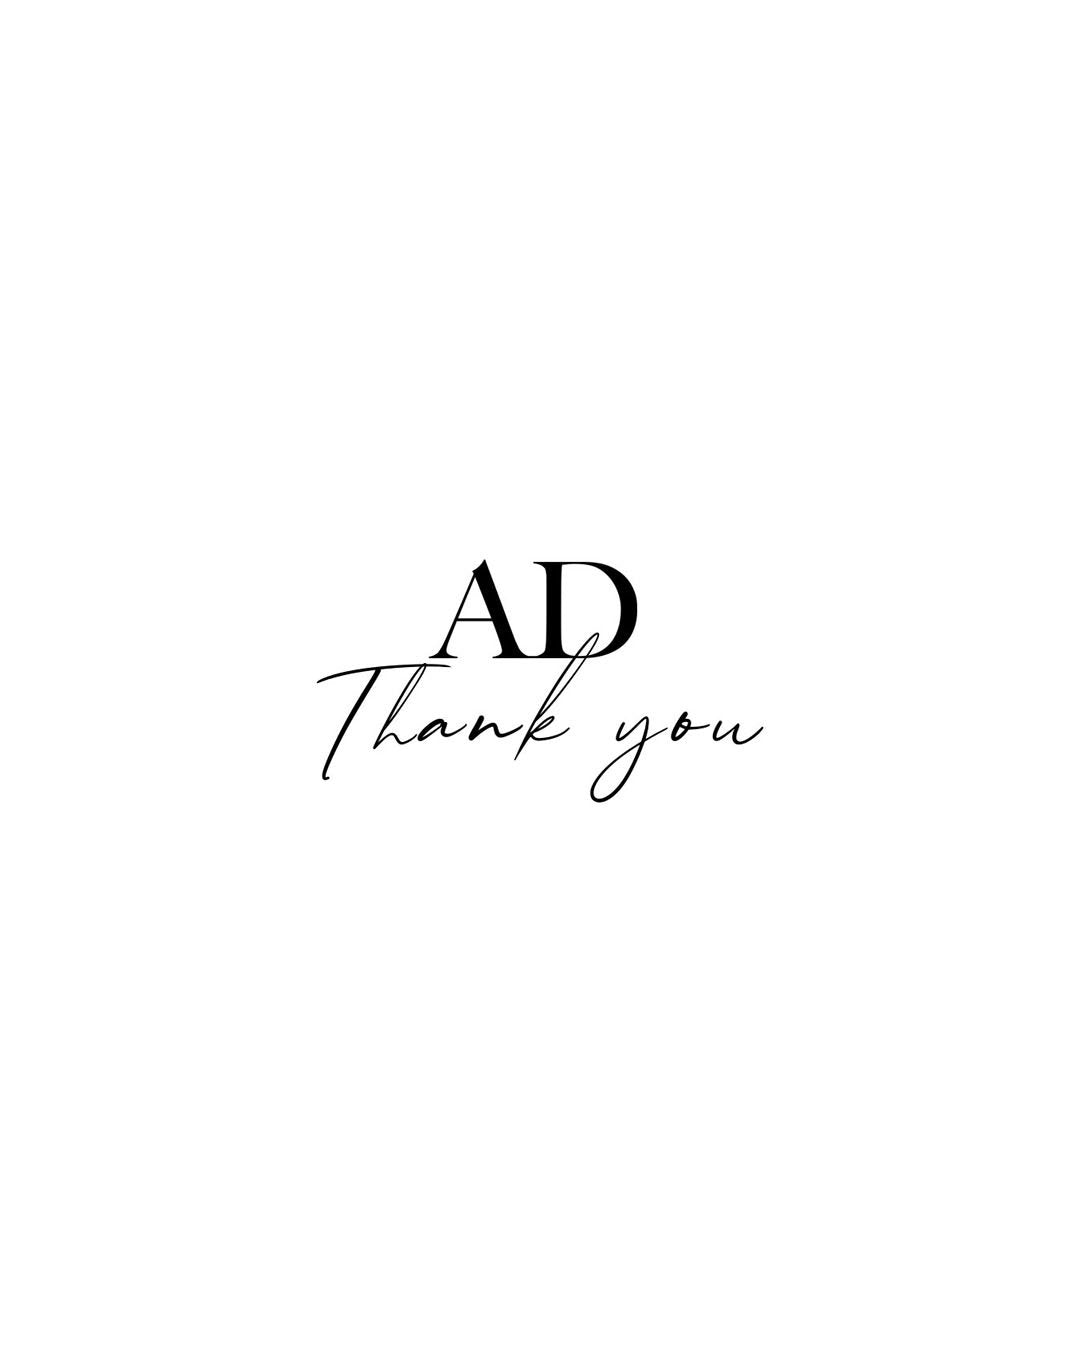 AD Thank You...July 2020